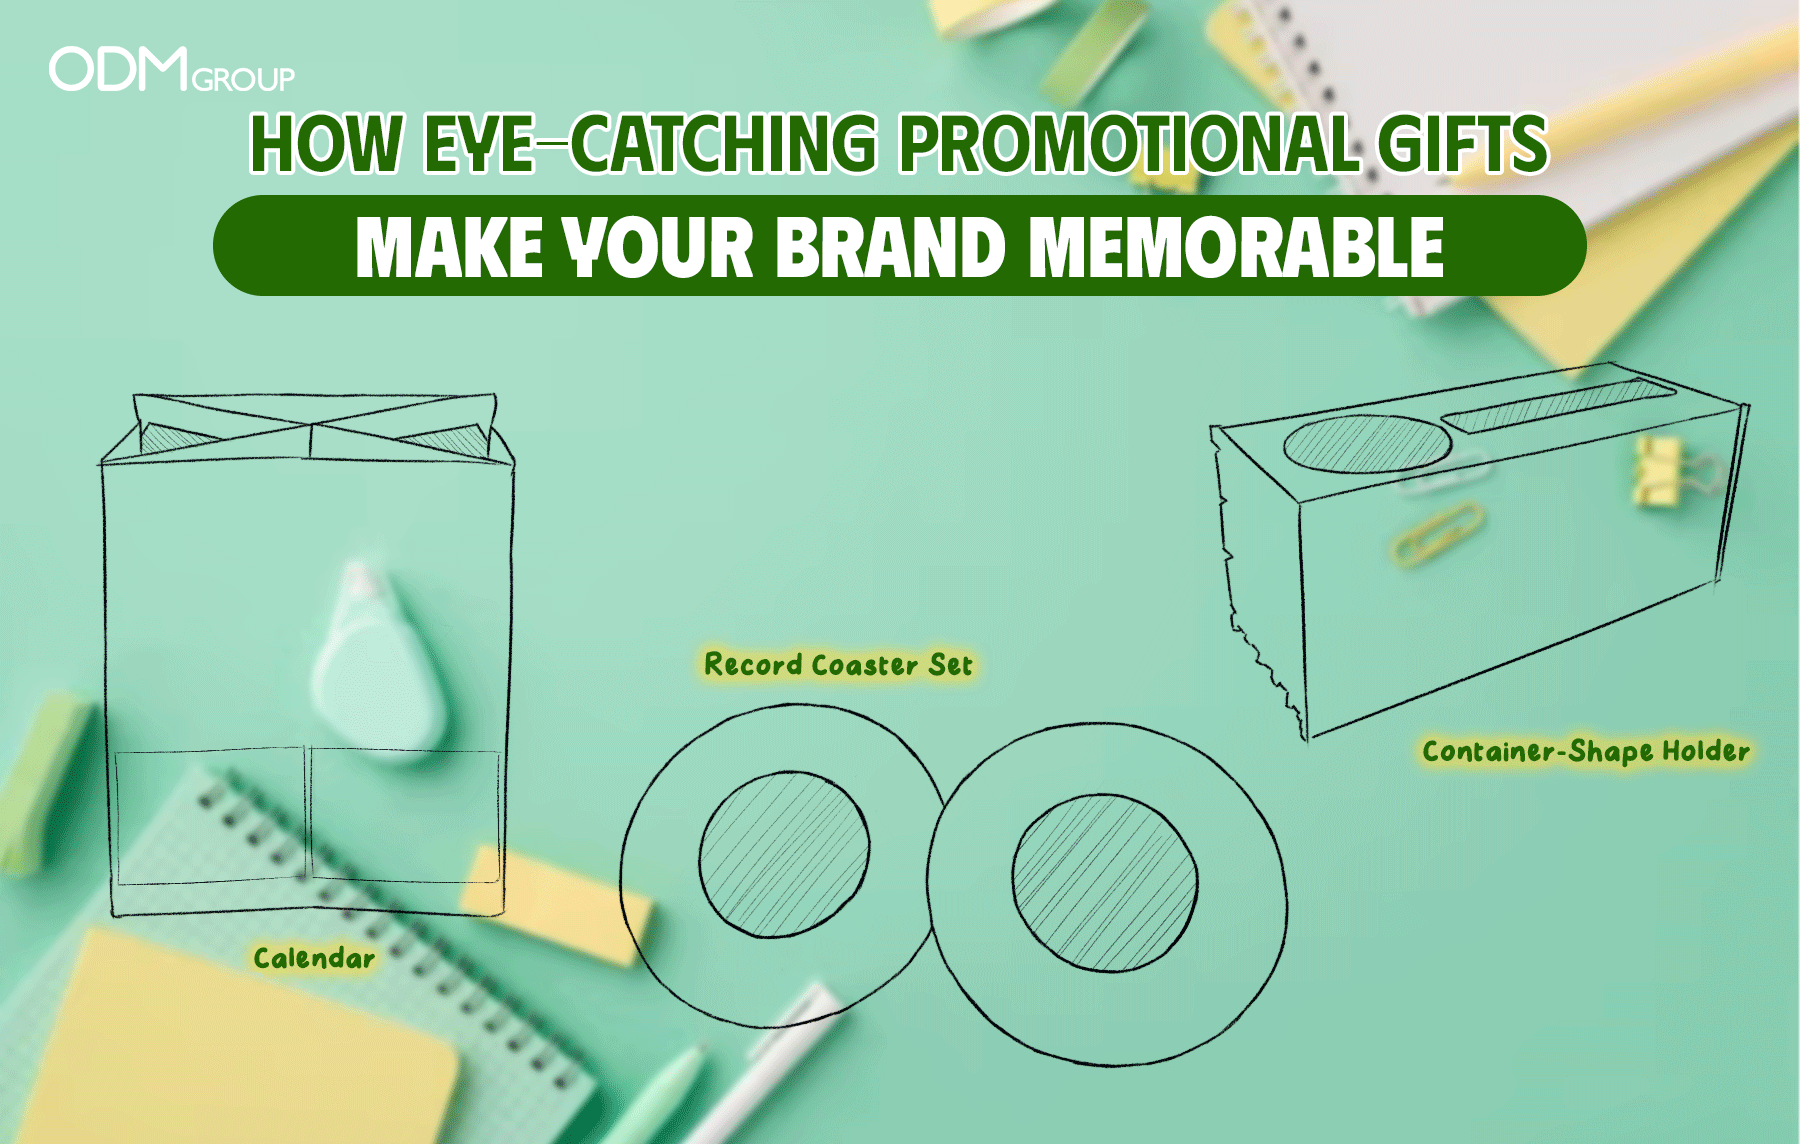 Catching-Eye Promotional Gifts